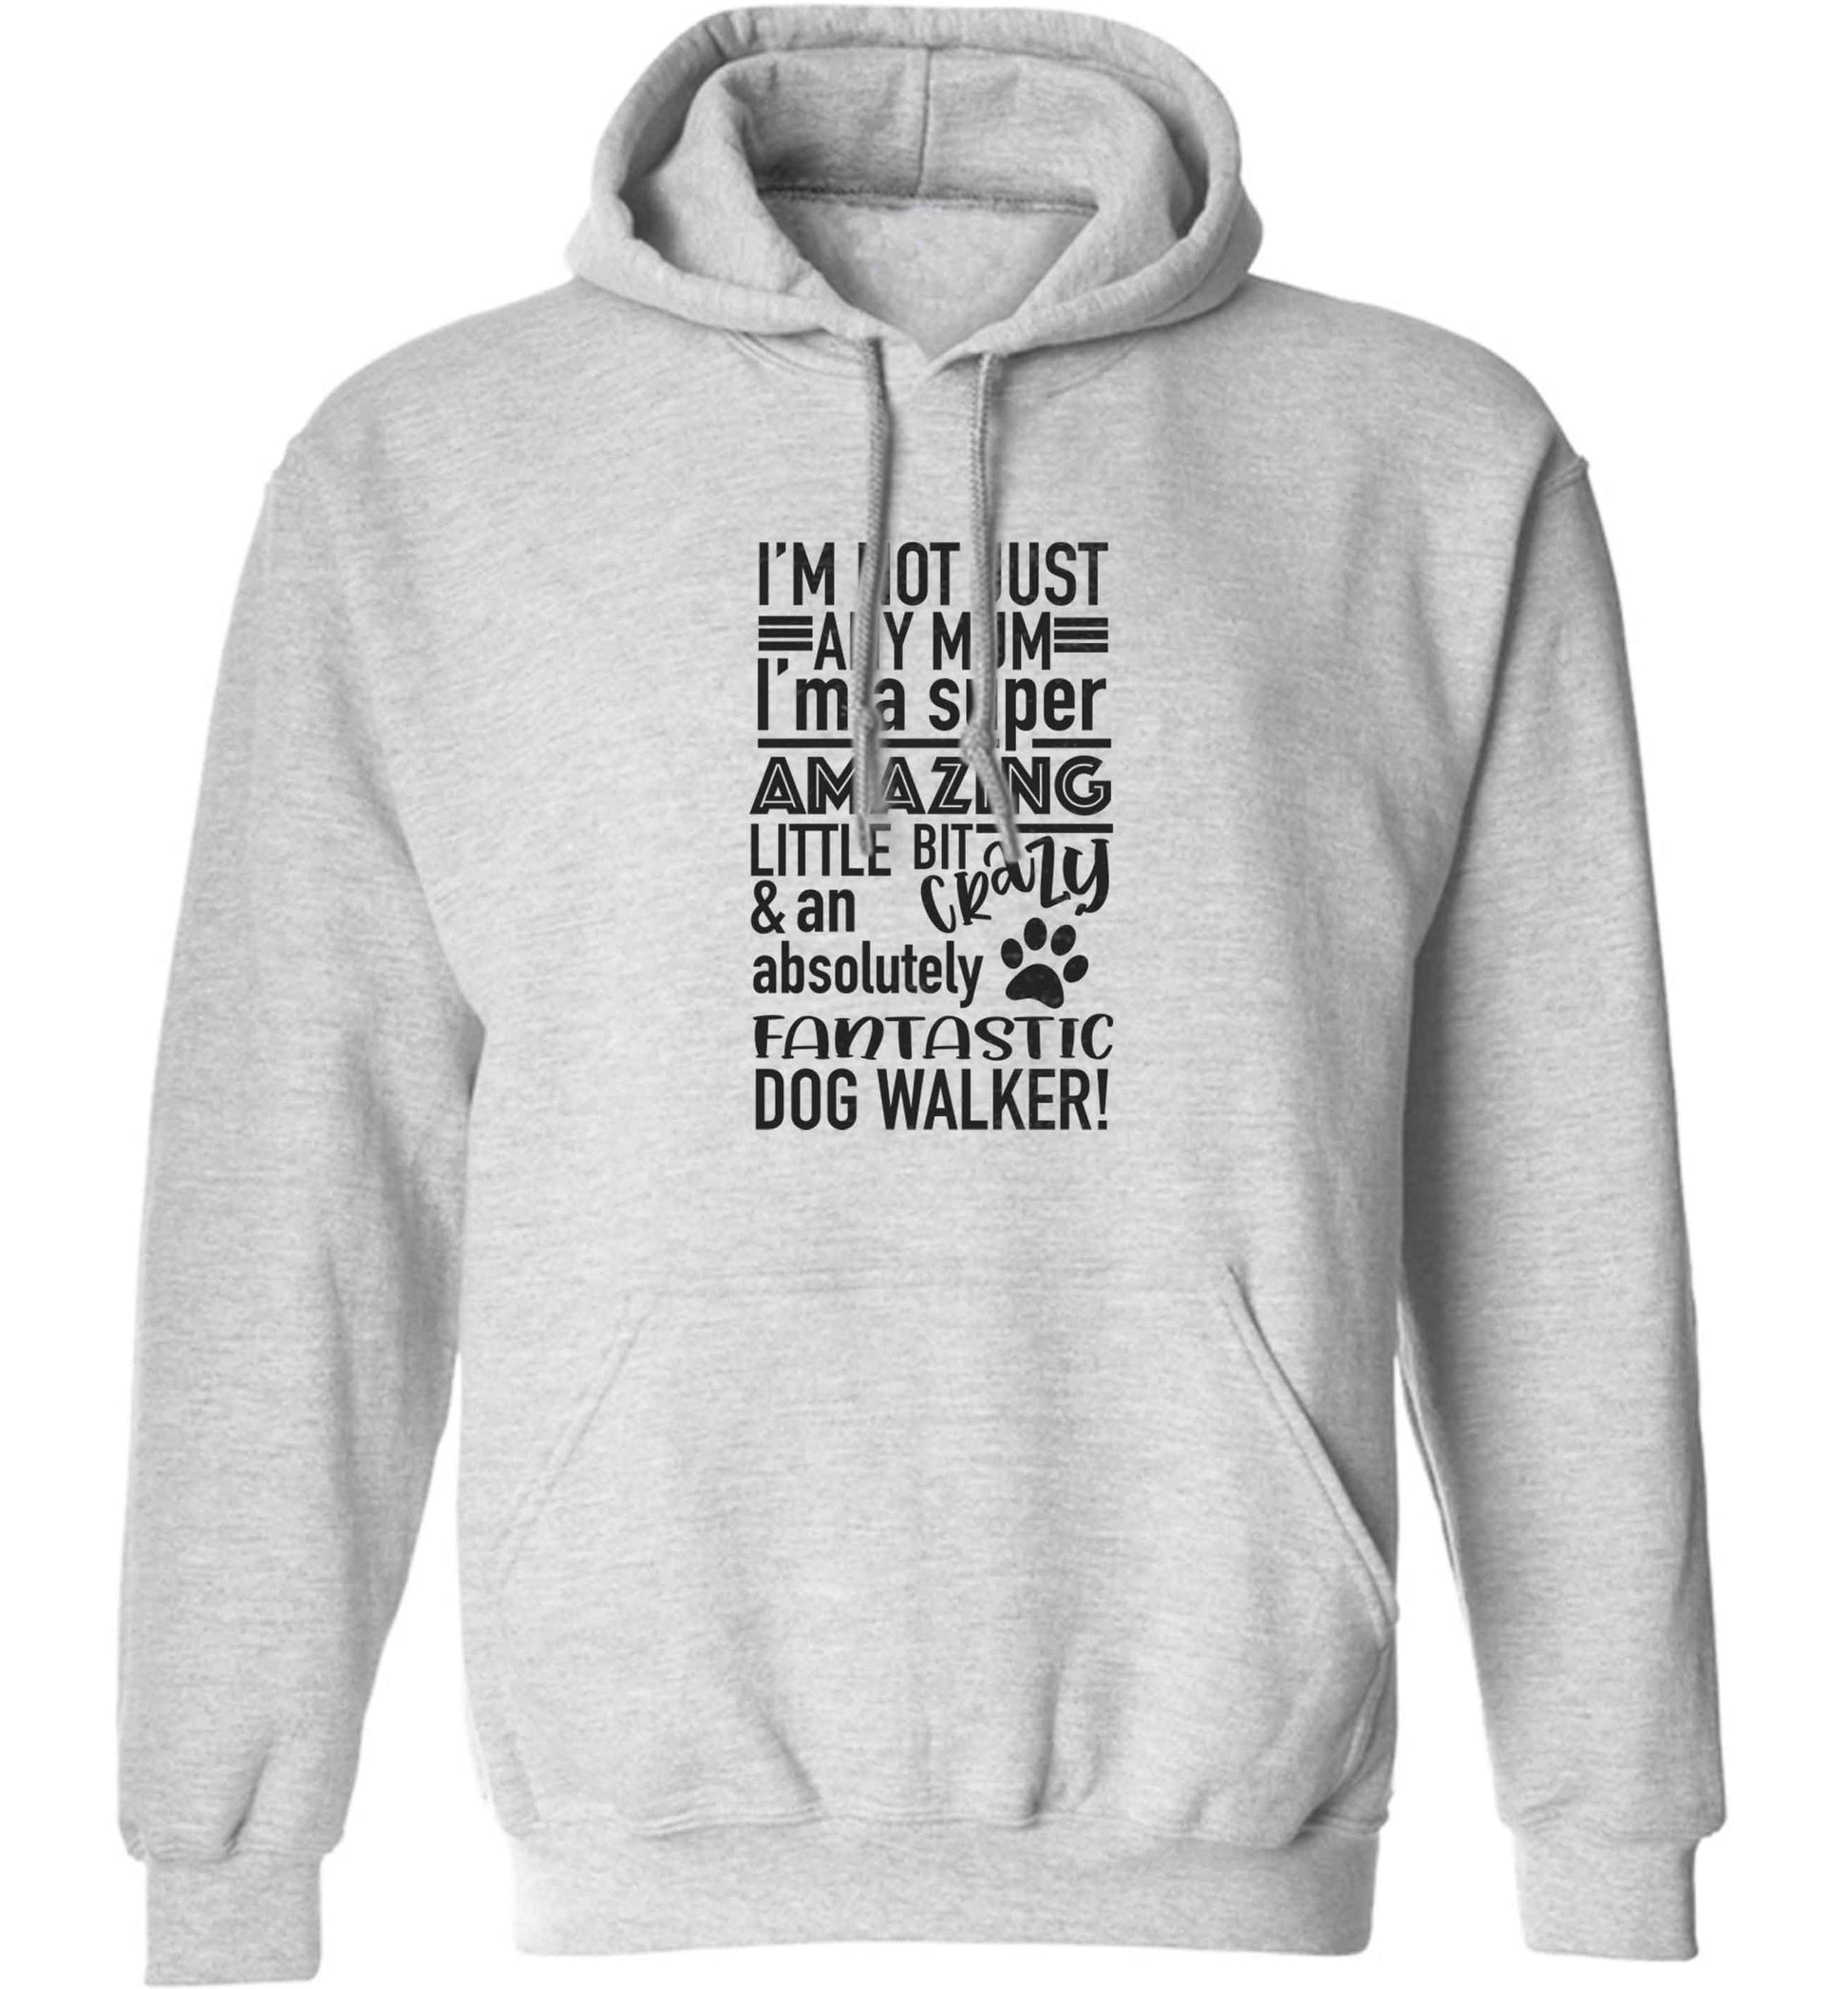 I'm not just any mum I'm a super amazing little bit crazy and an absolutely fantastic dog walker! adults unisex grey hoodie 2XL